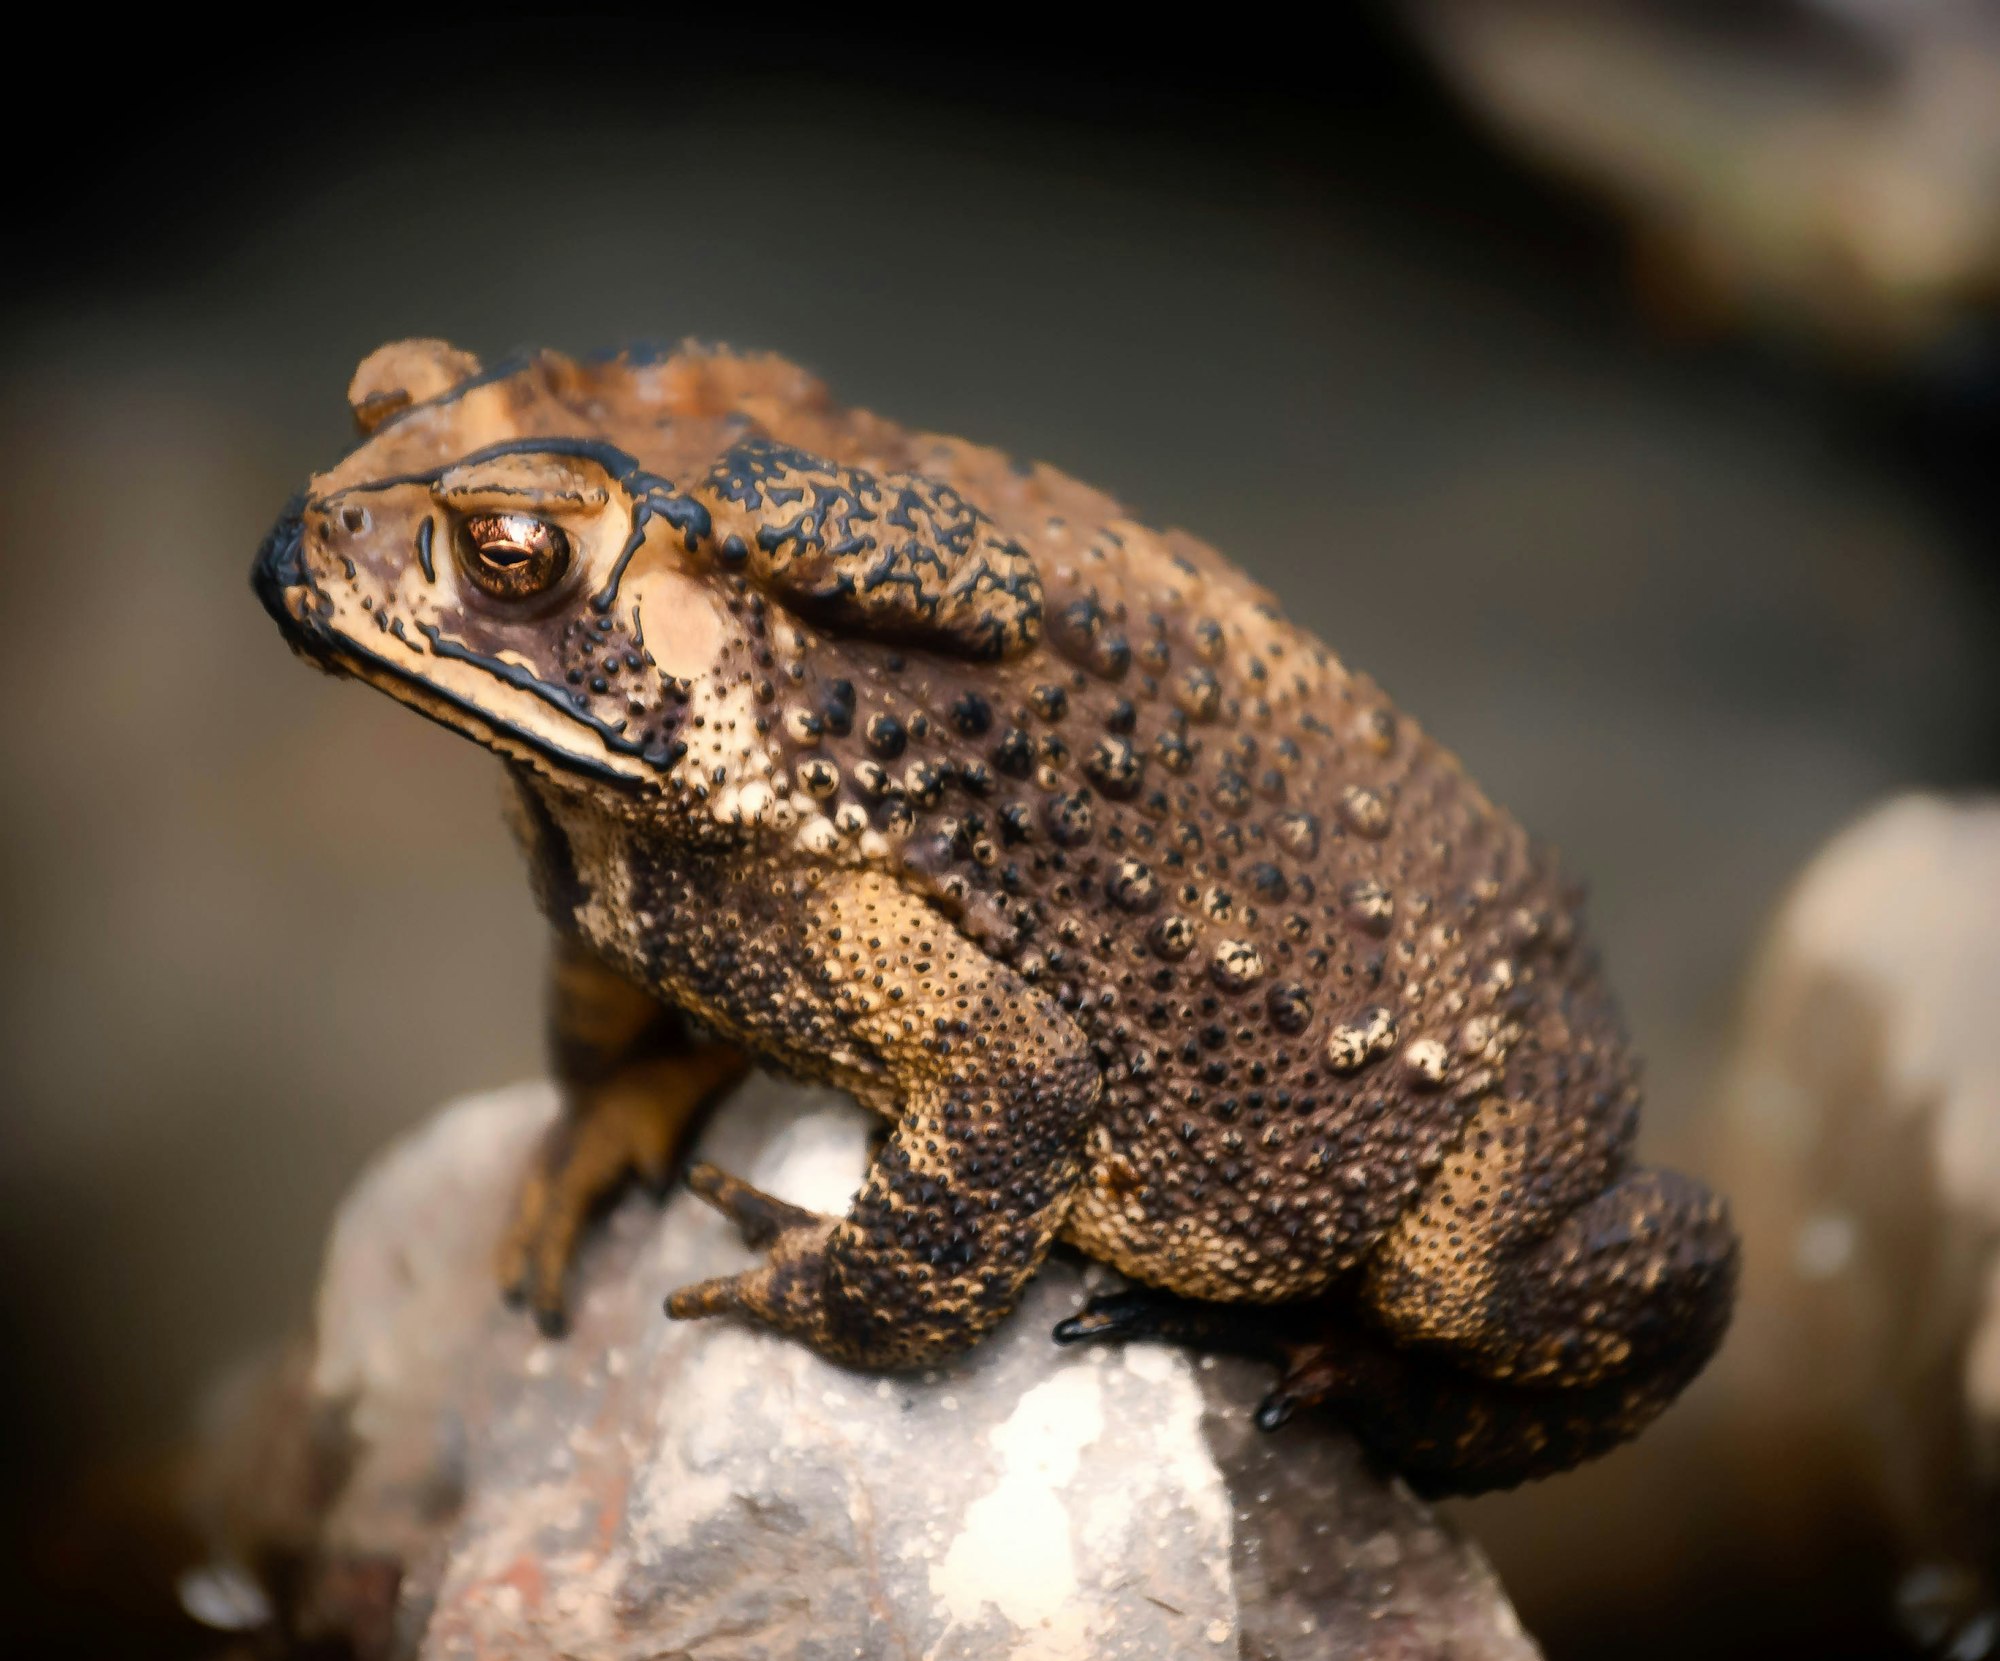 A poisonous toad in Thailand